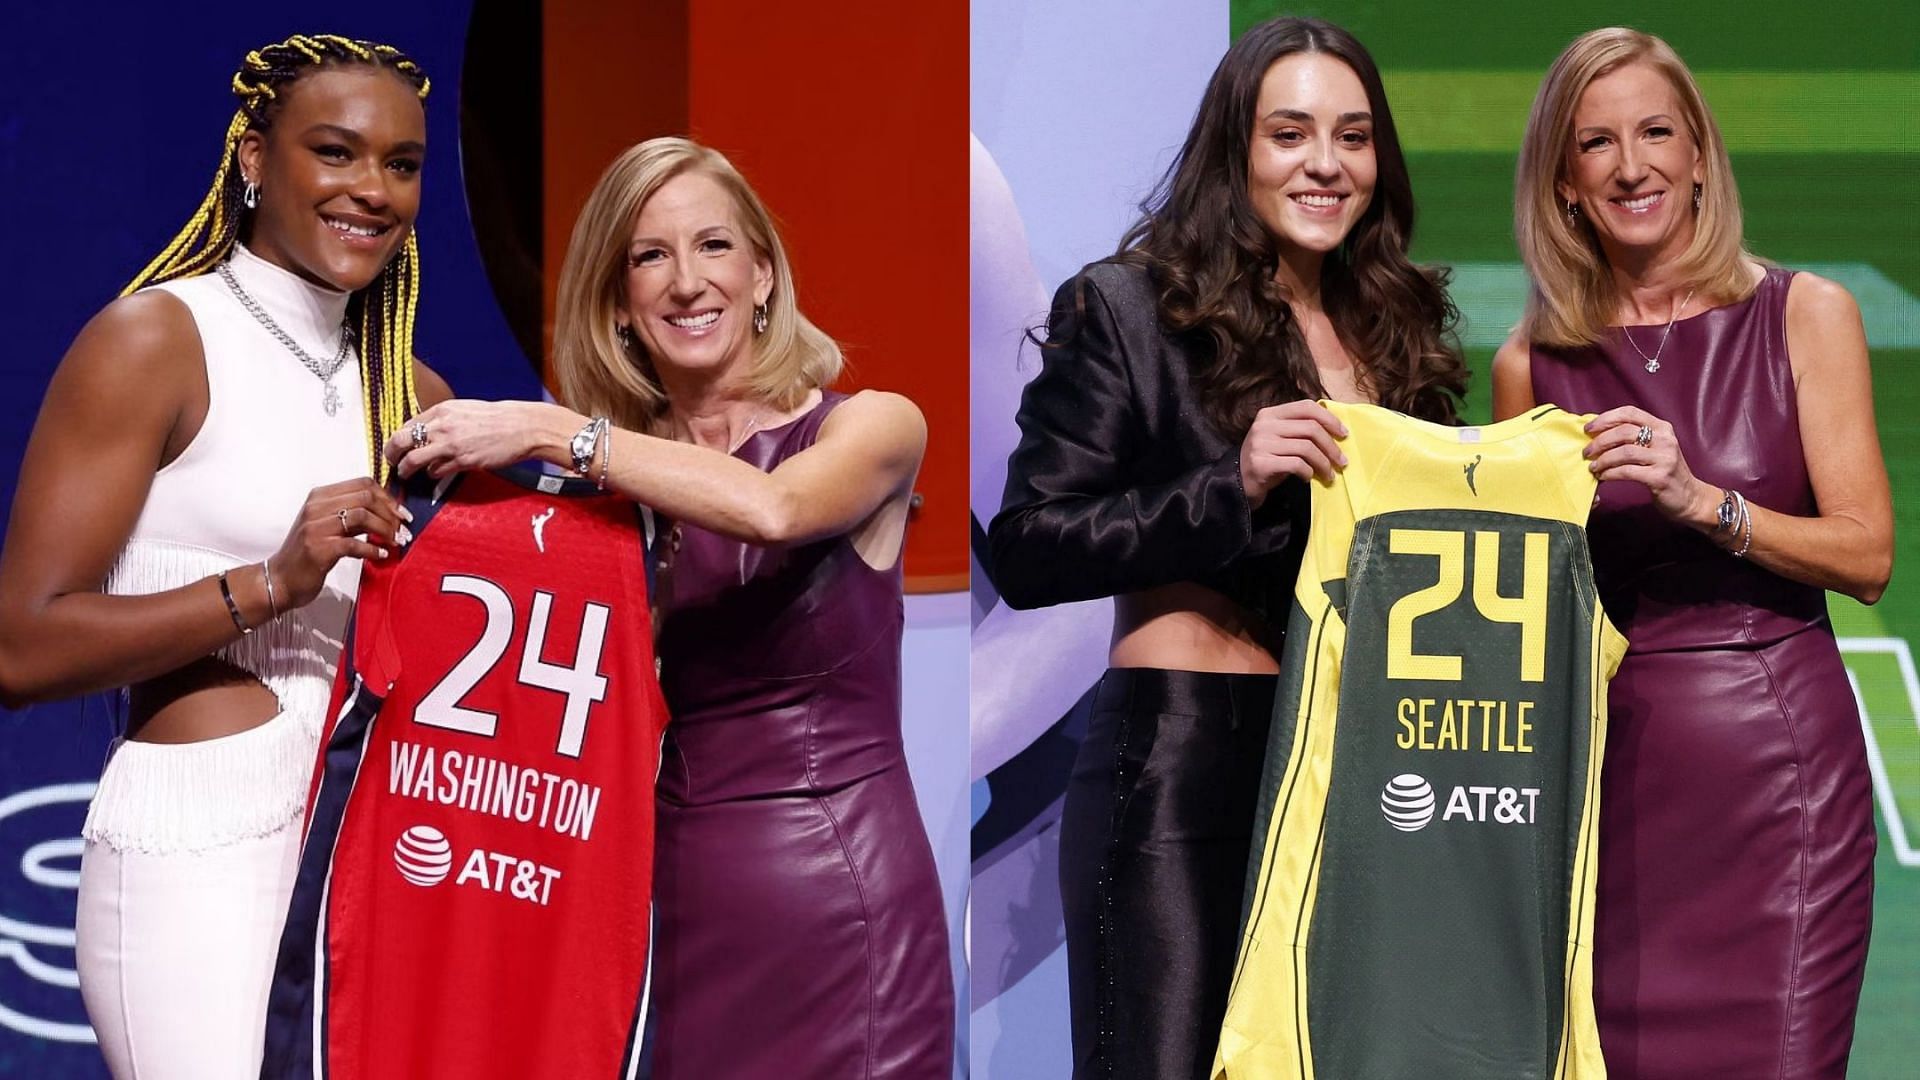 UConn players Aaliyah Edwards (left) and Nika Muhl (right) were selected in the 2024 WNBA Draft by the Washington Mystics and the Seattle Storm, respectively.